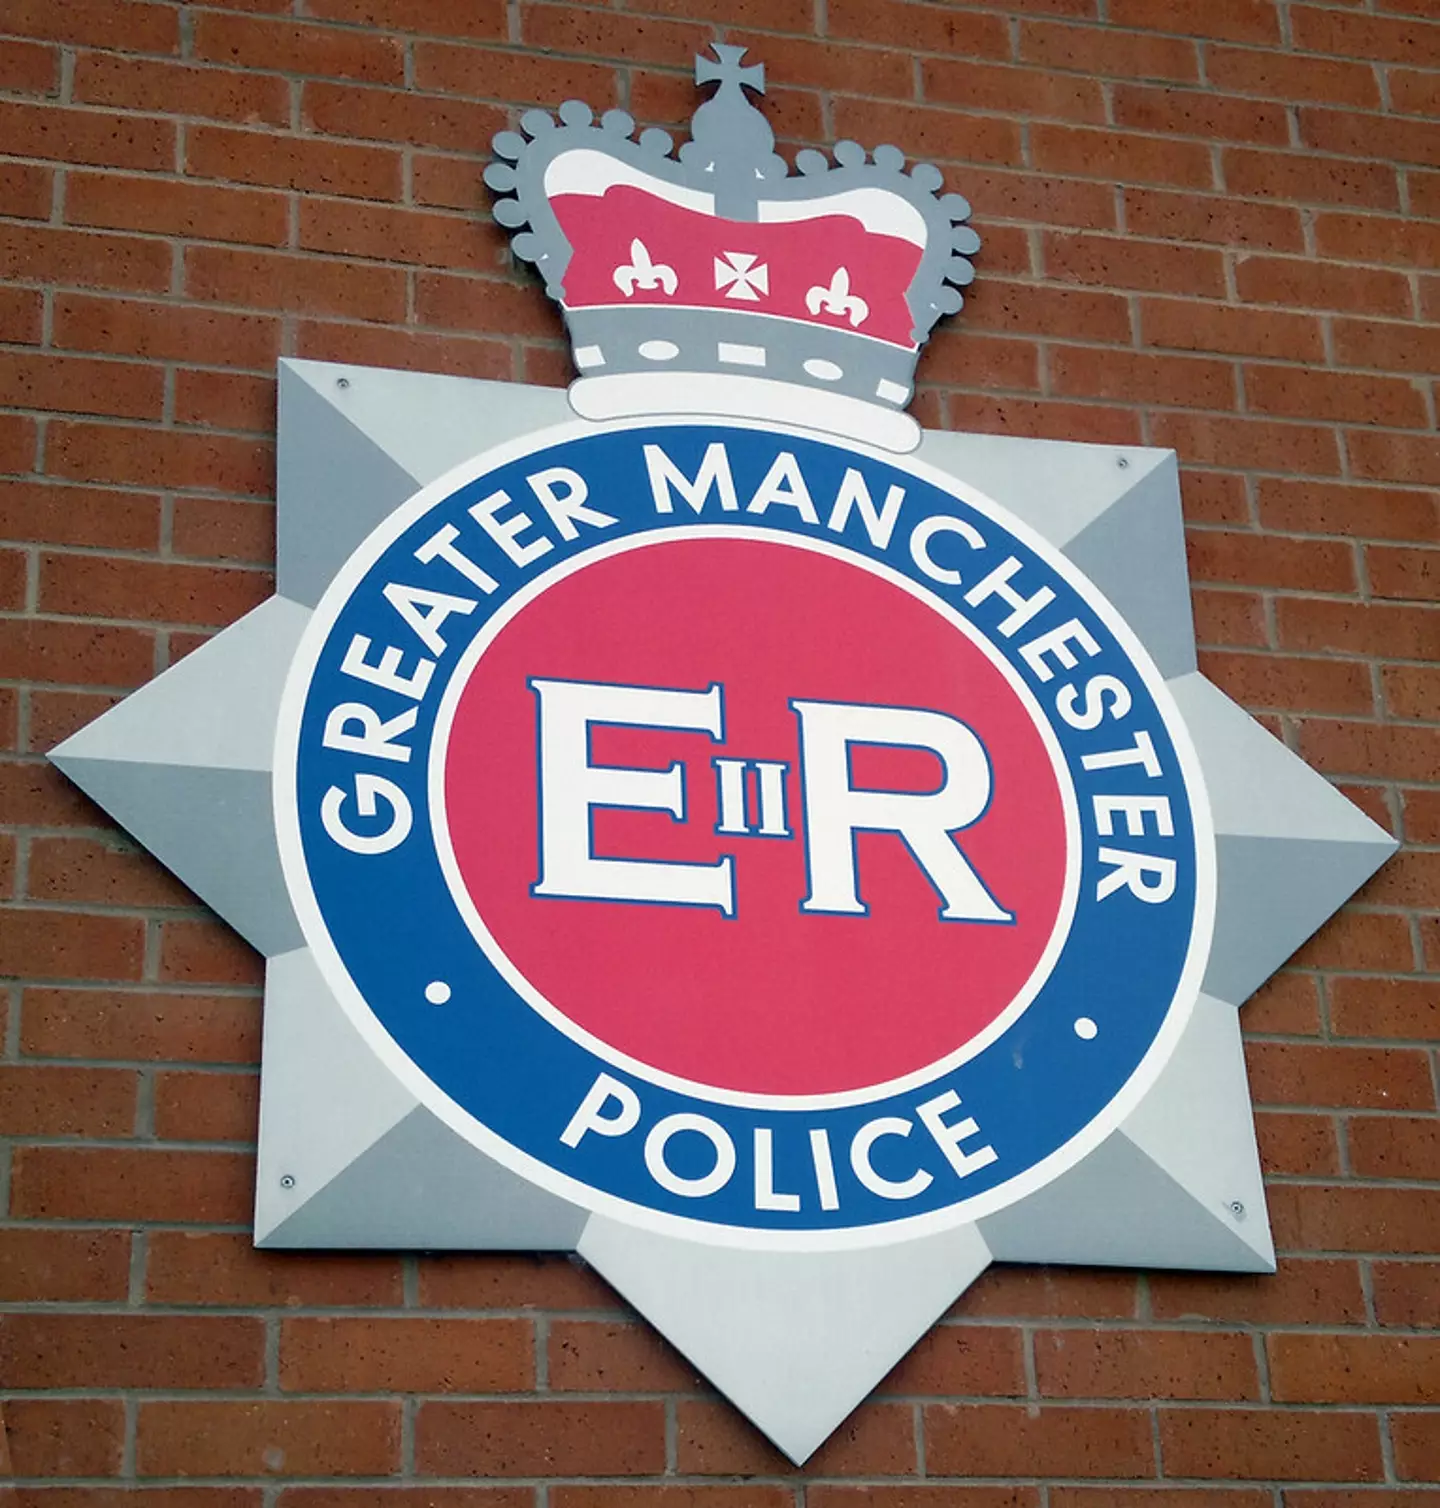 Greater Manchester Police often posts about their activity on social media. (